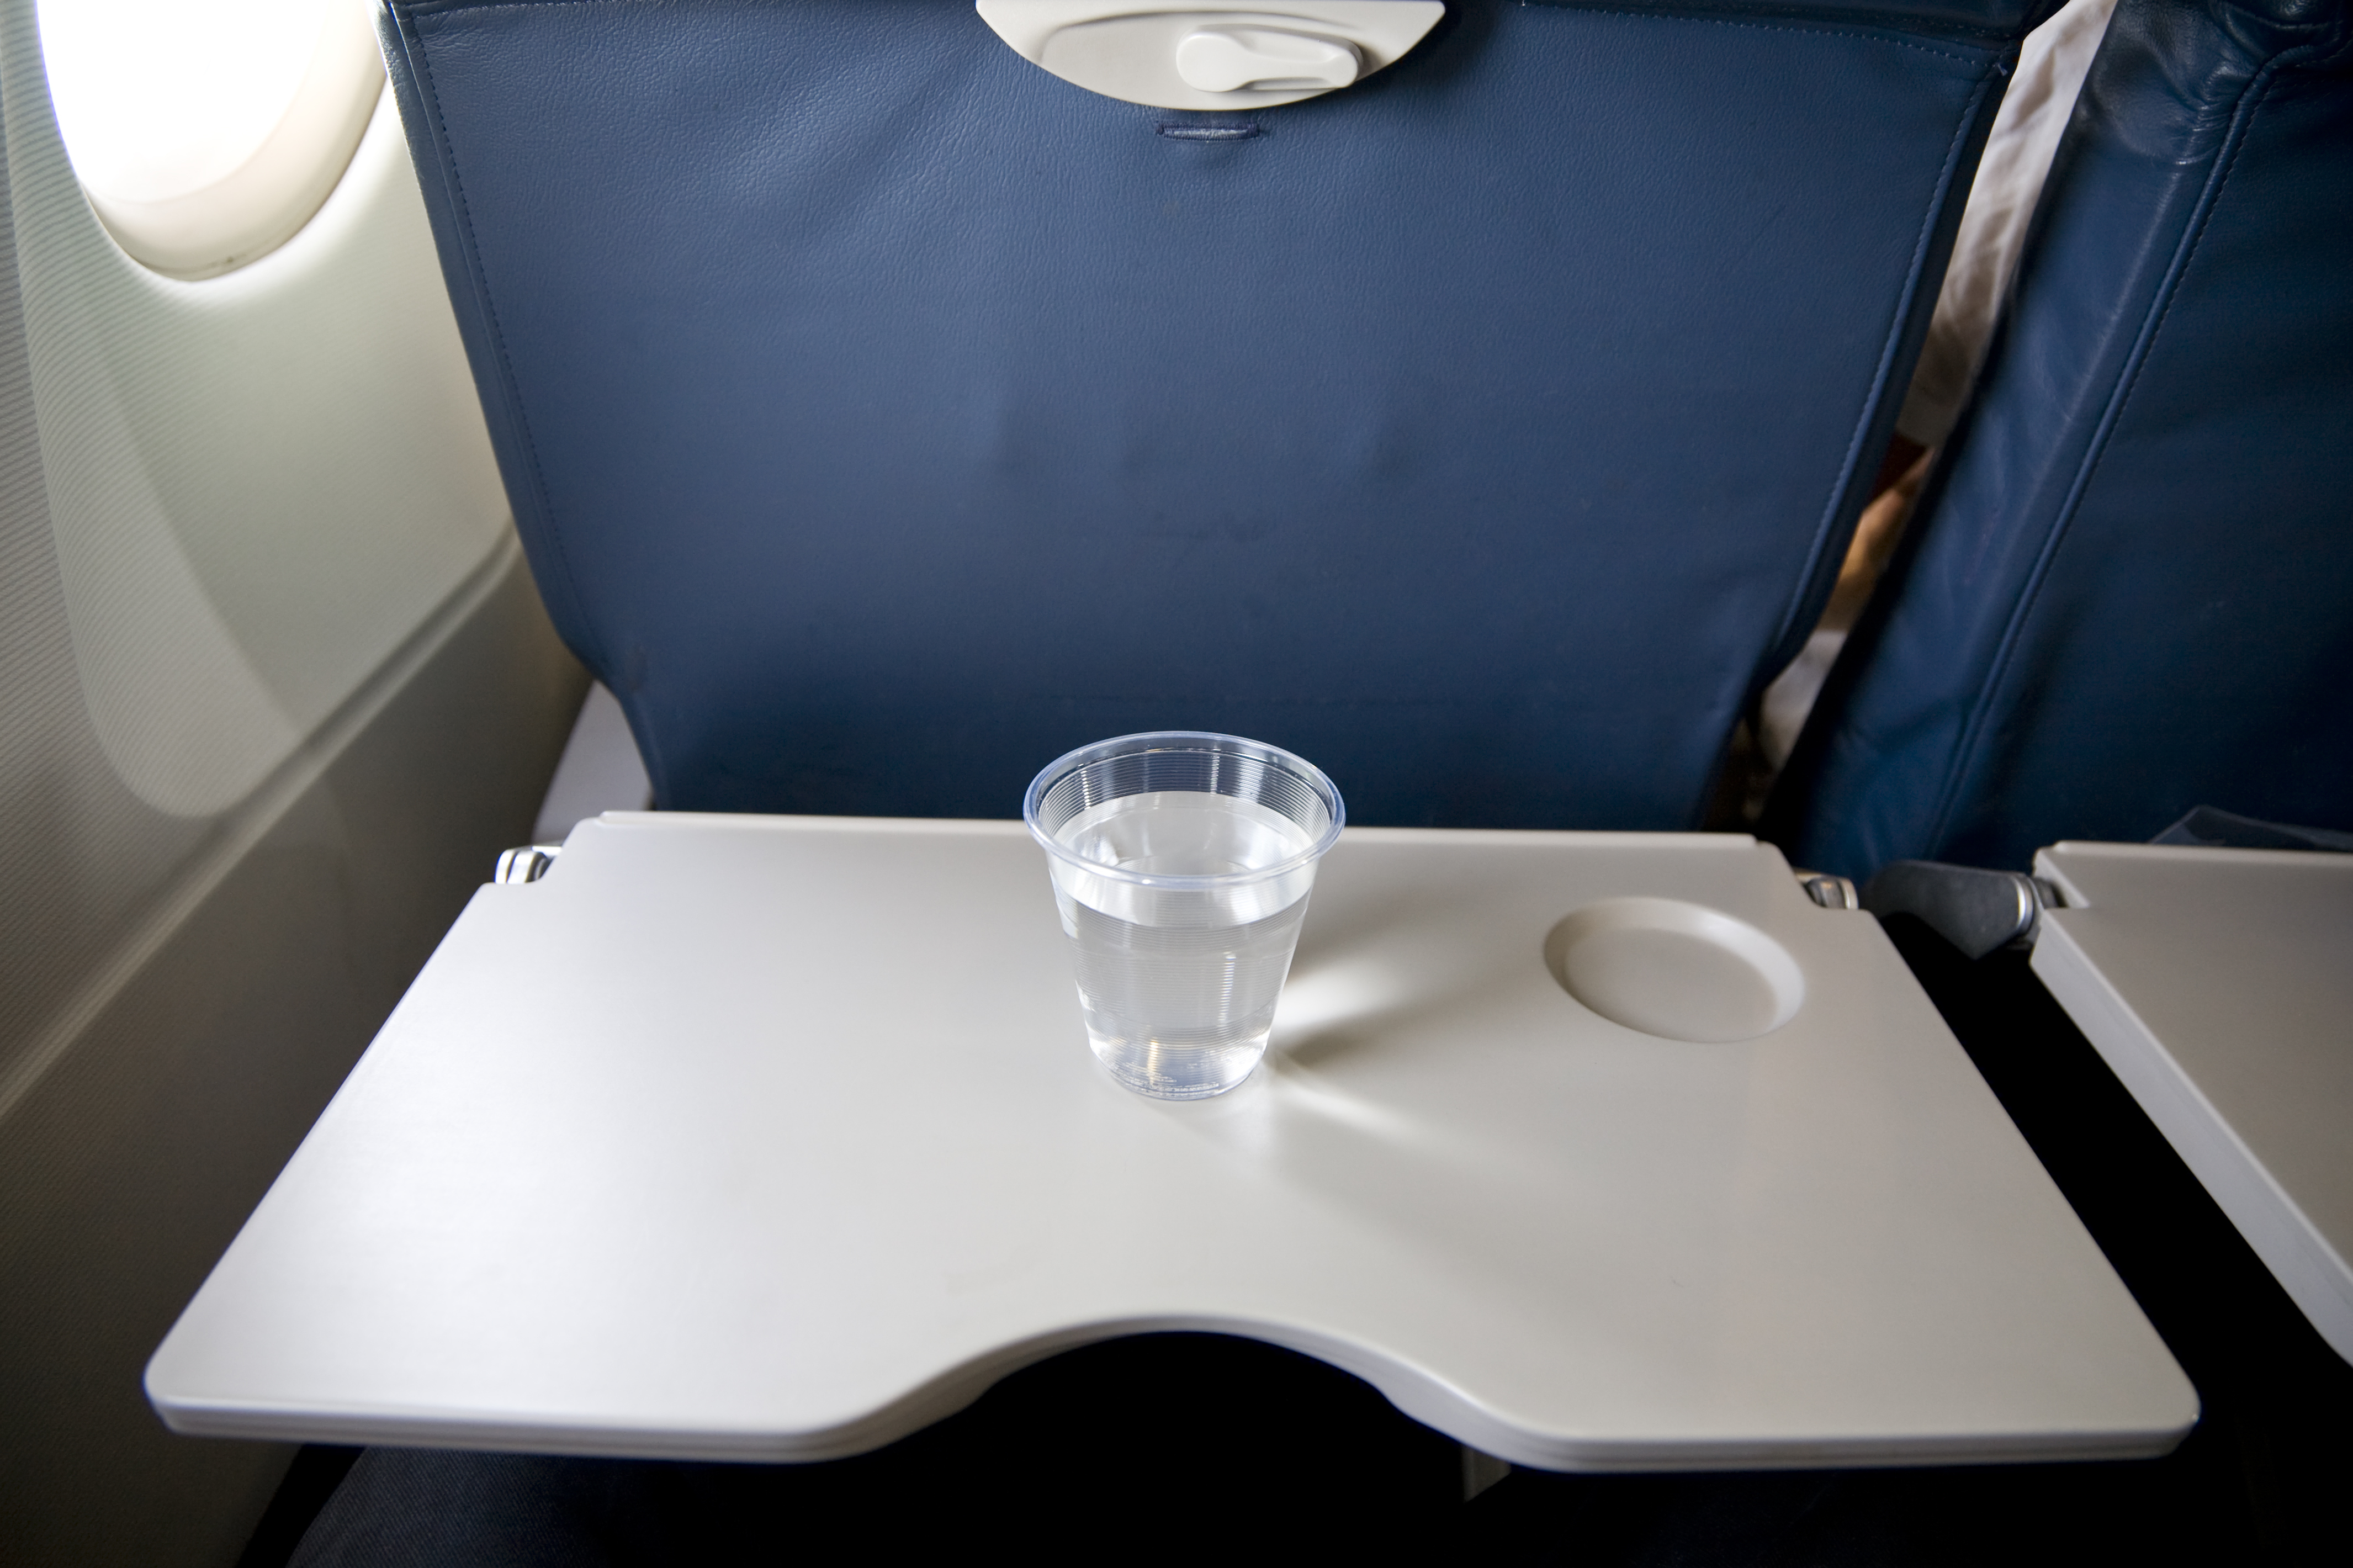 Tap water on an airplane | Source: Getty Images